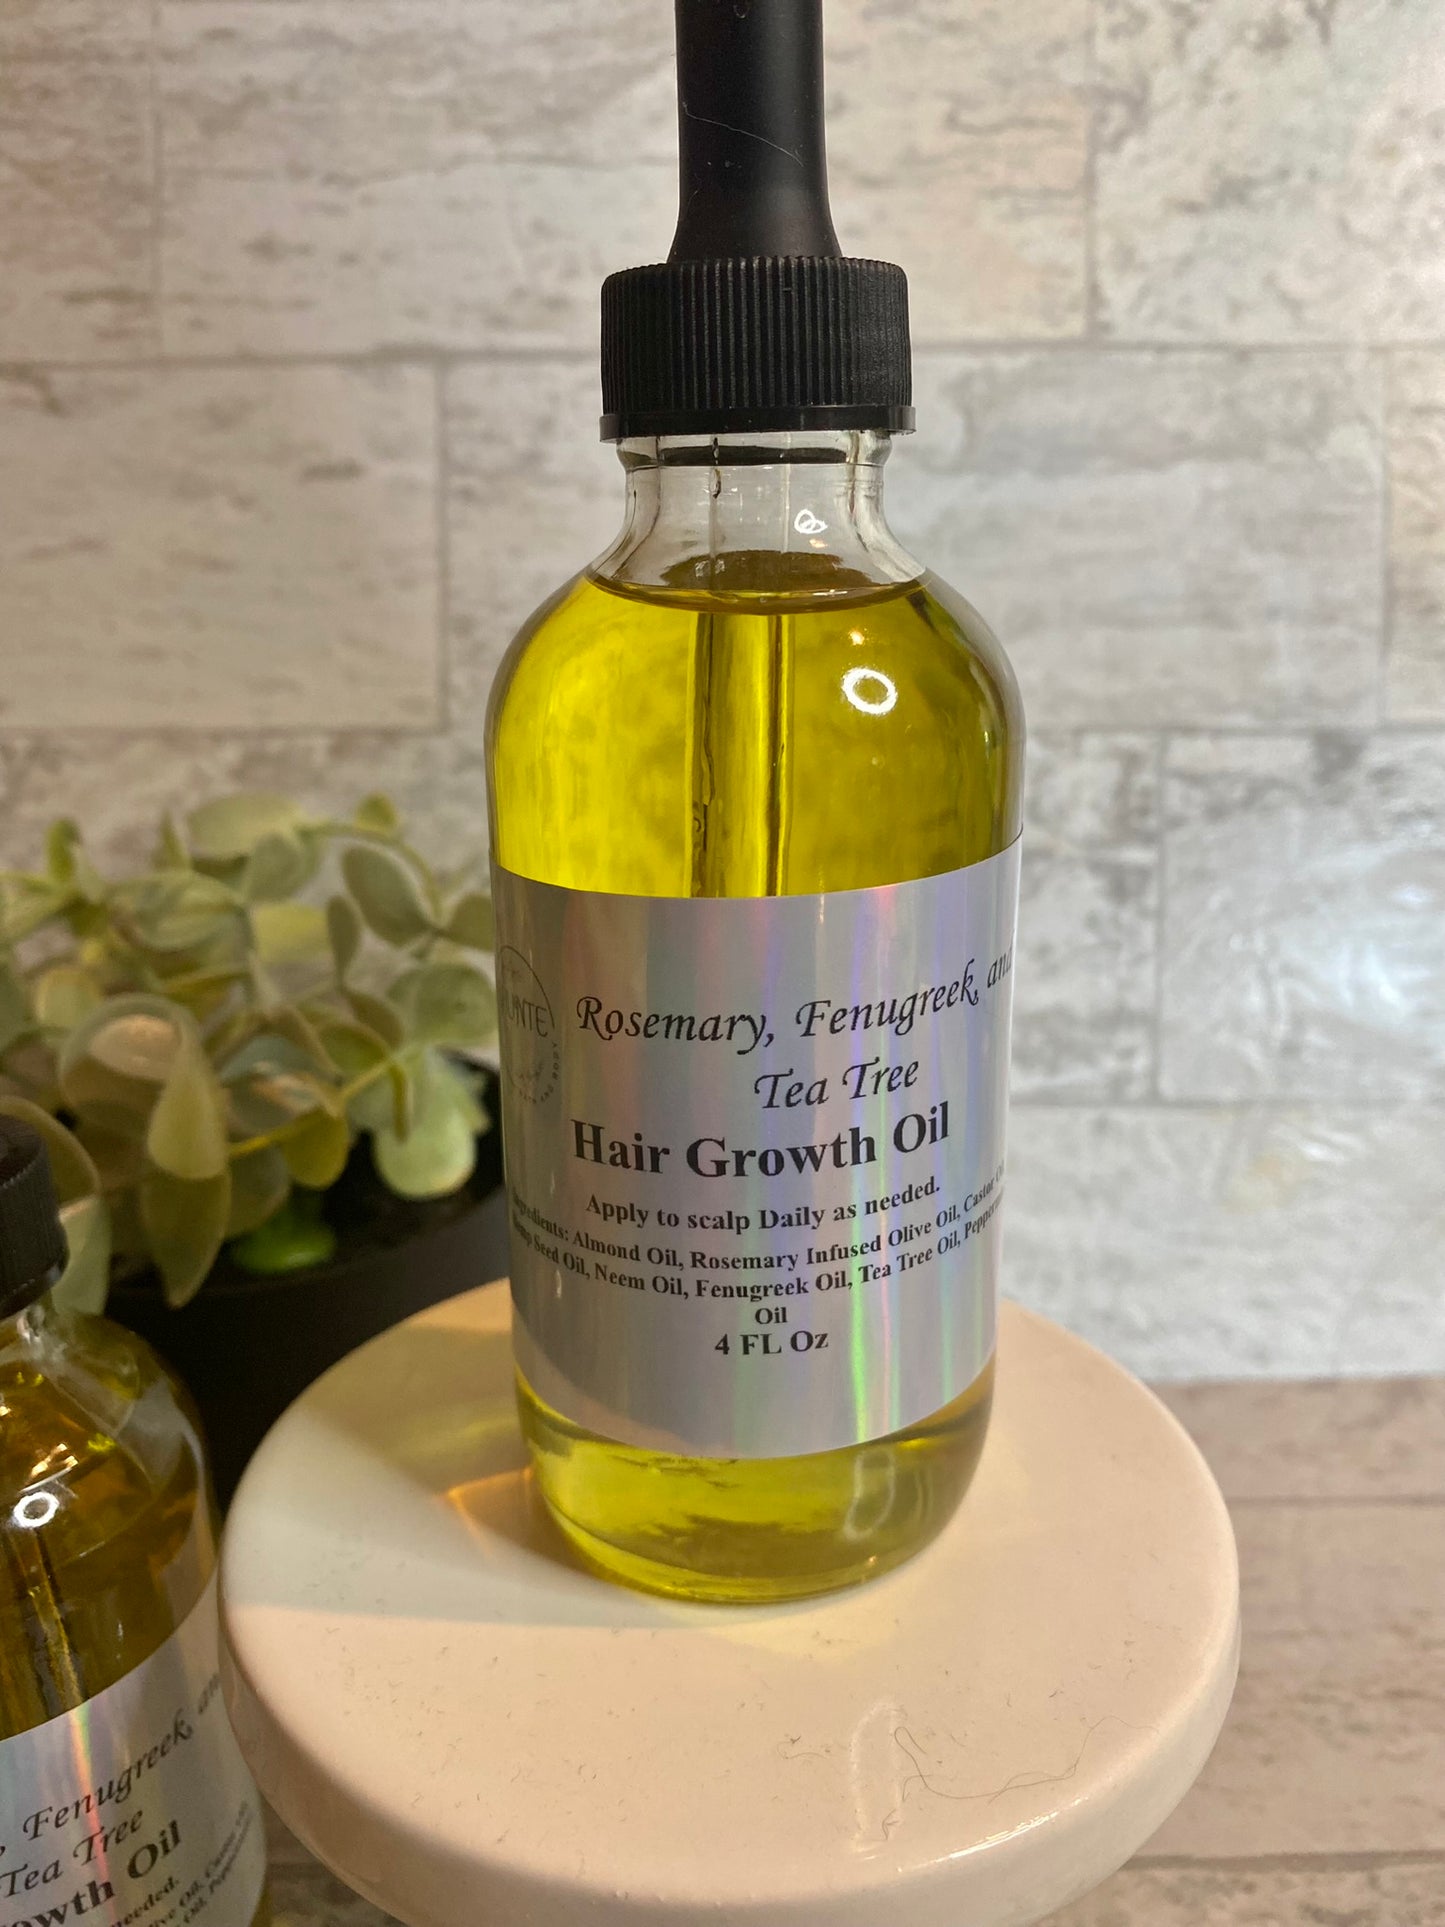 Hair Growth Oil with Tea Tree, Fenugreek, and Rosemary Infused Olive Oil